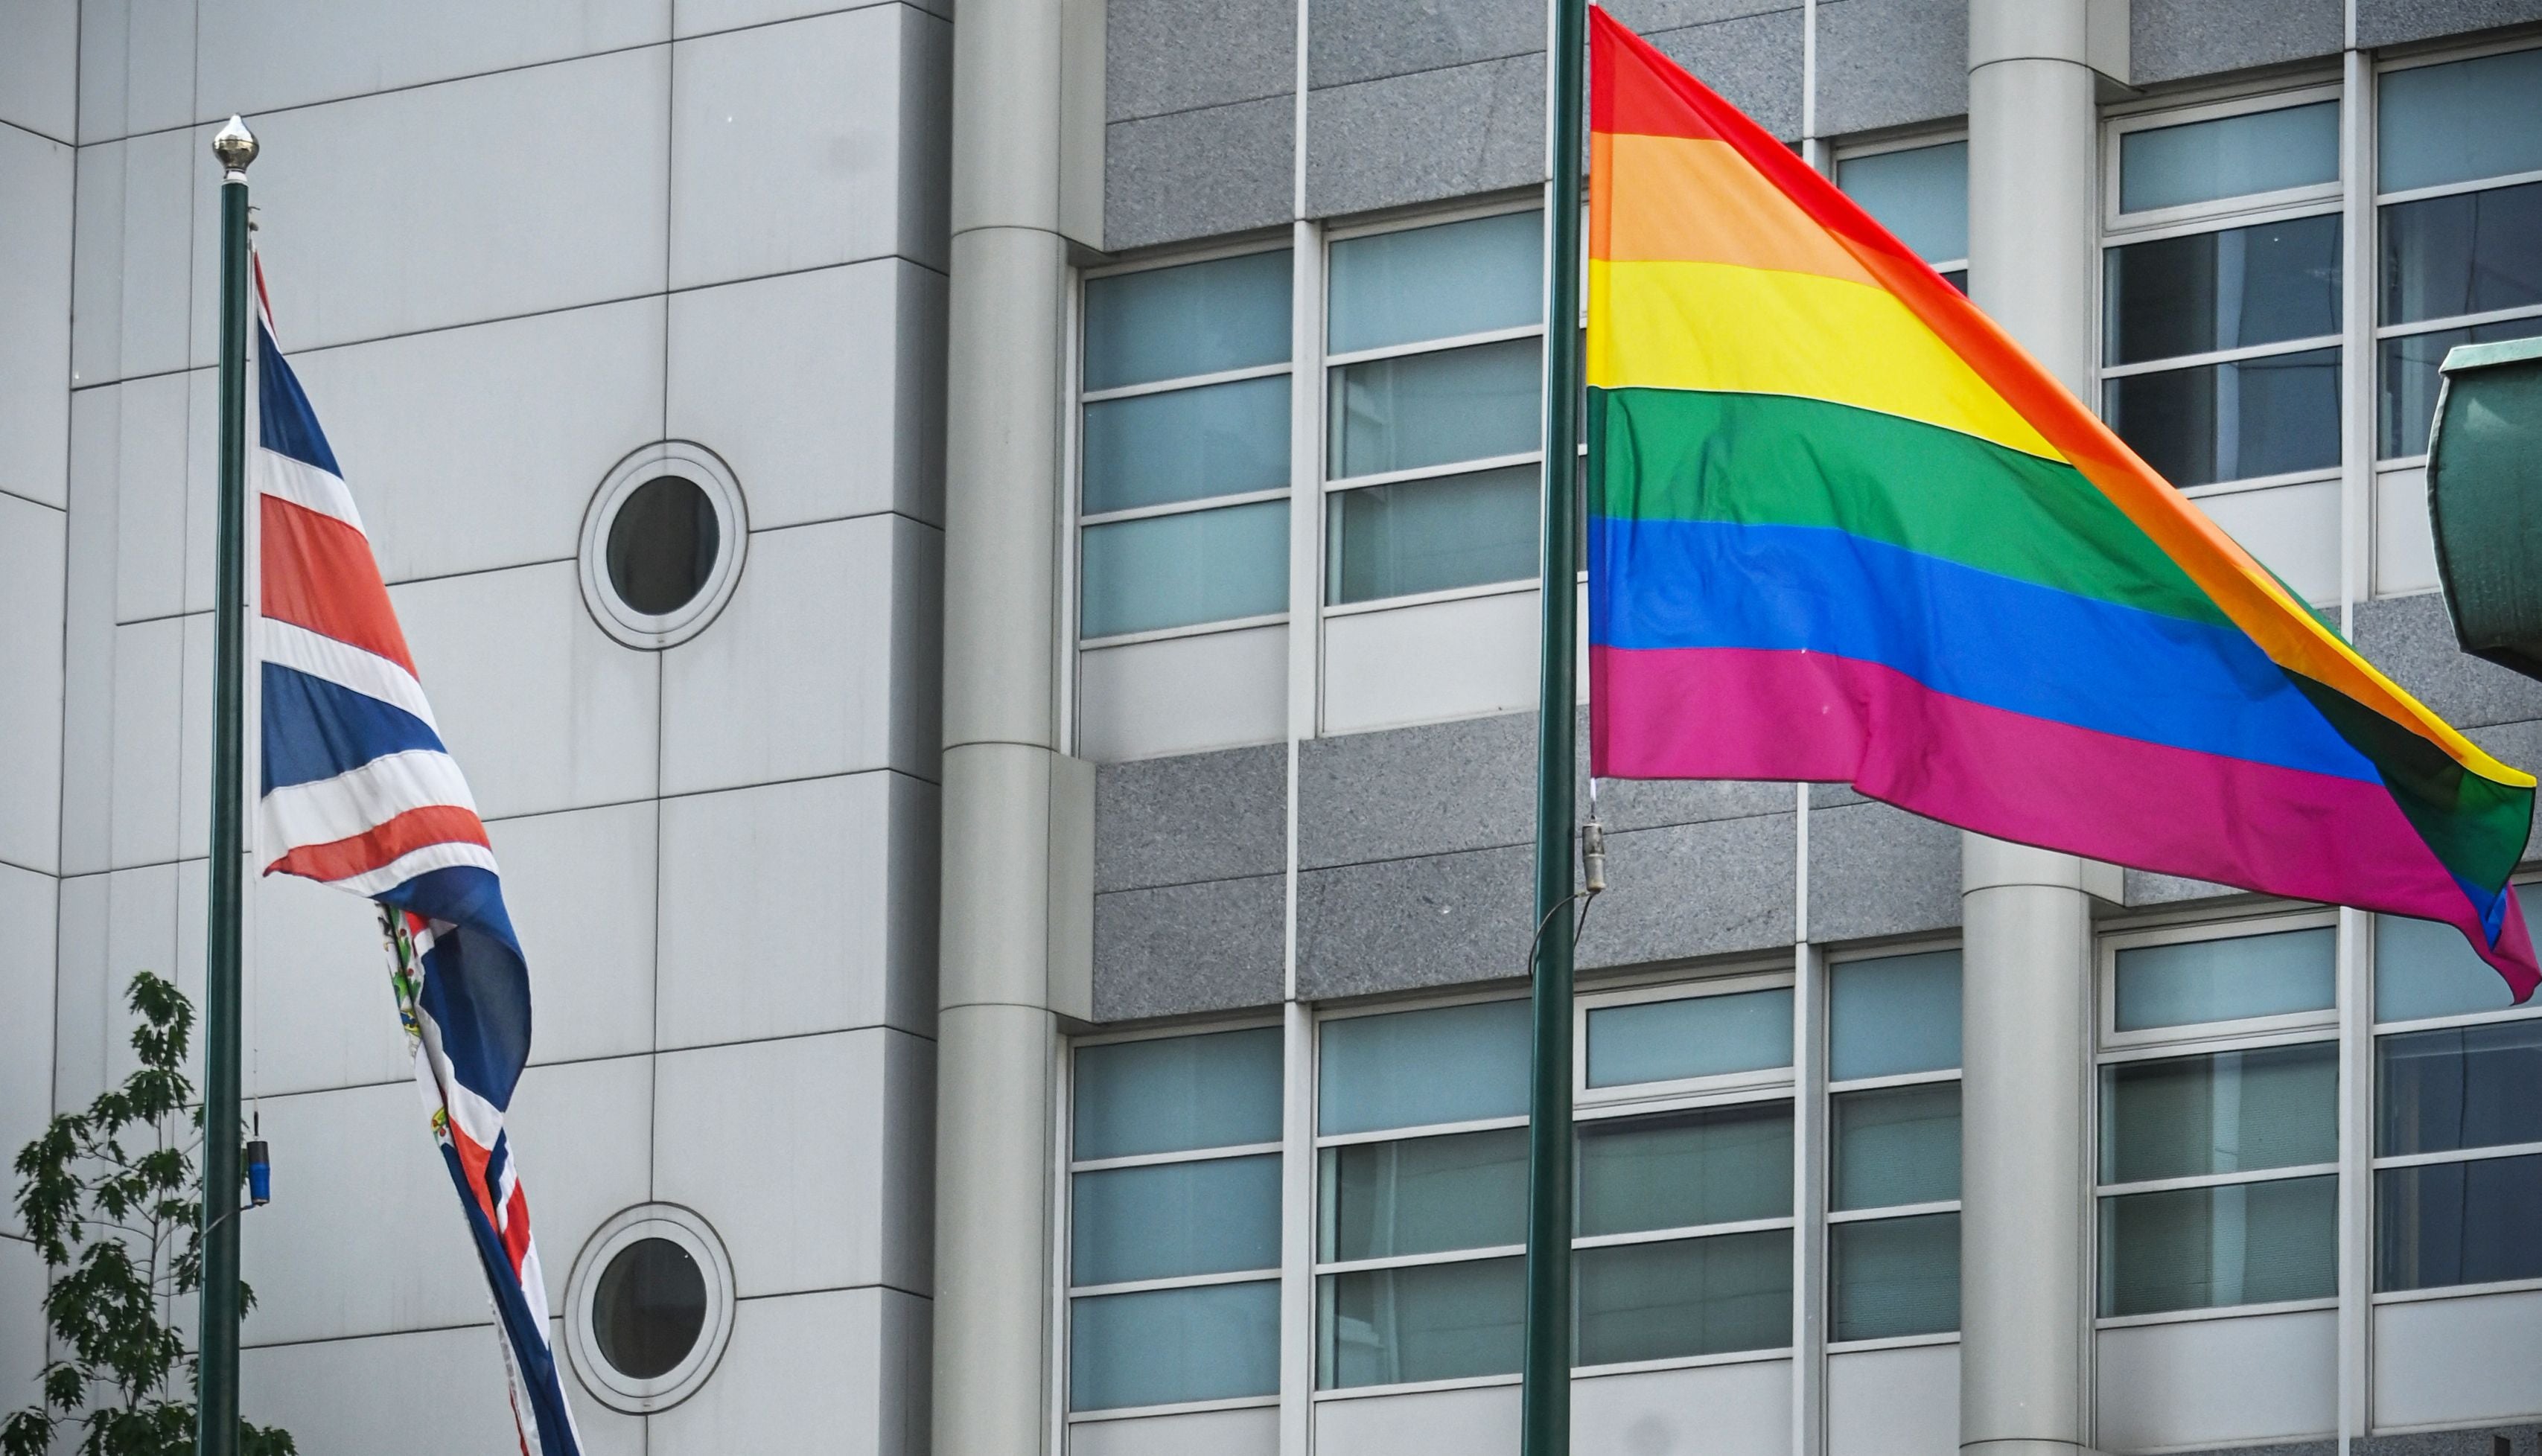 File image: British embassies around the world have displayed rainbow flags this month to mark Pride